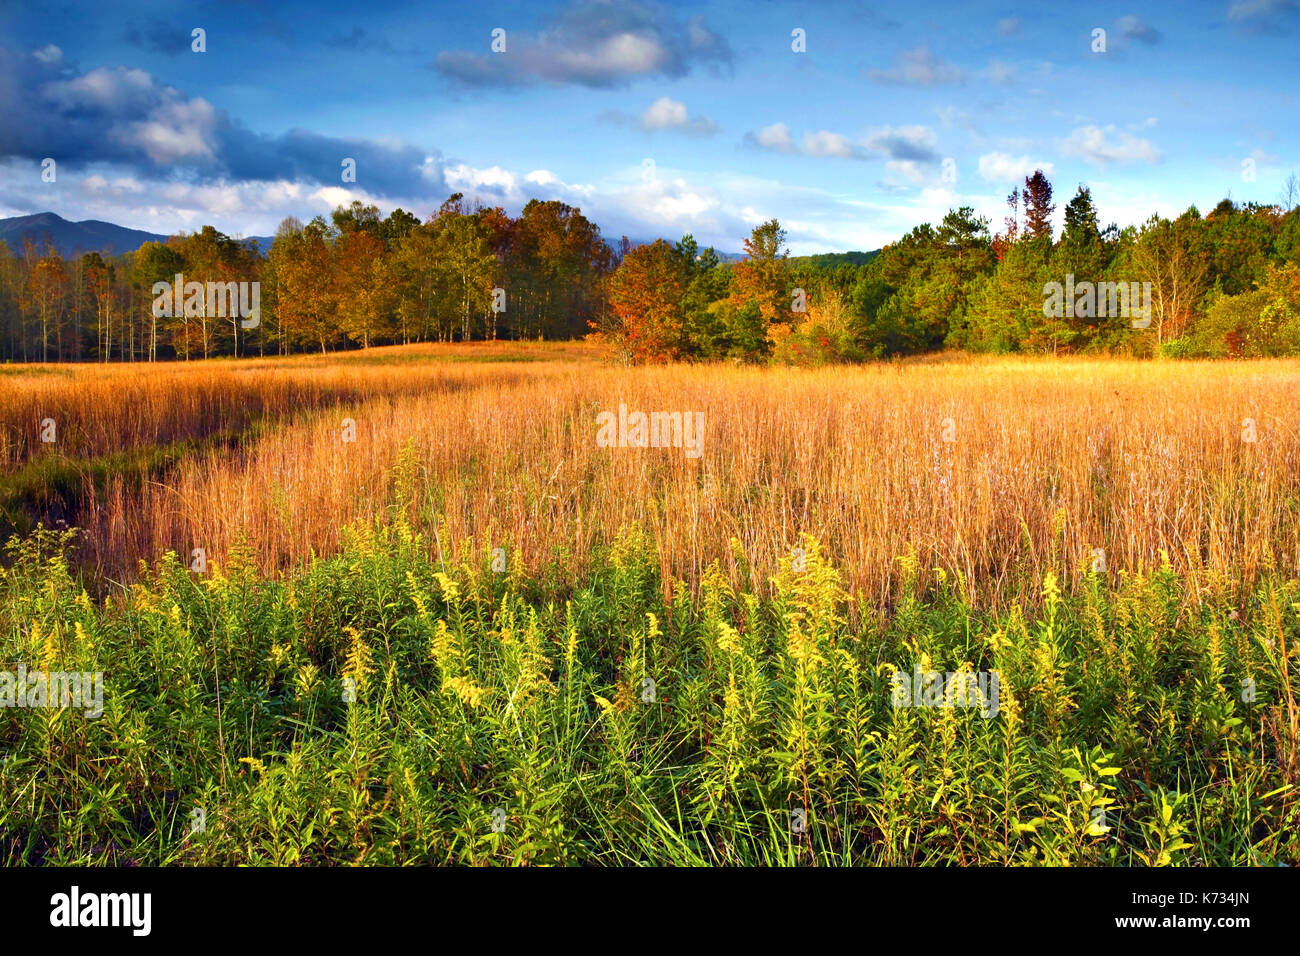 A colorful view of the countryside surrounding Chatuge Lake, North Carolina during the fall season Stock Photo